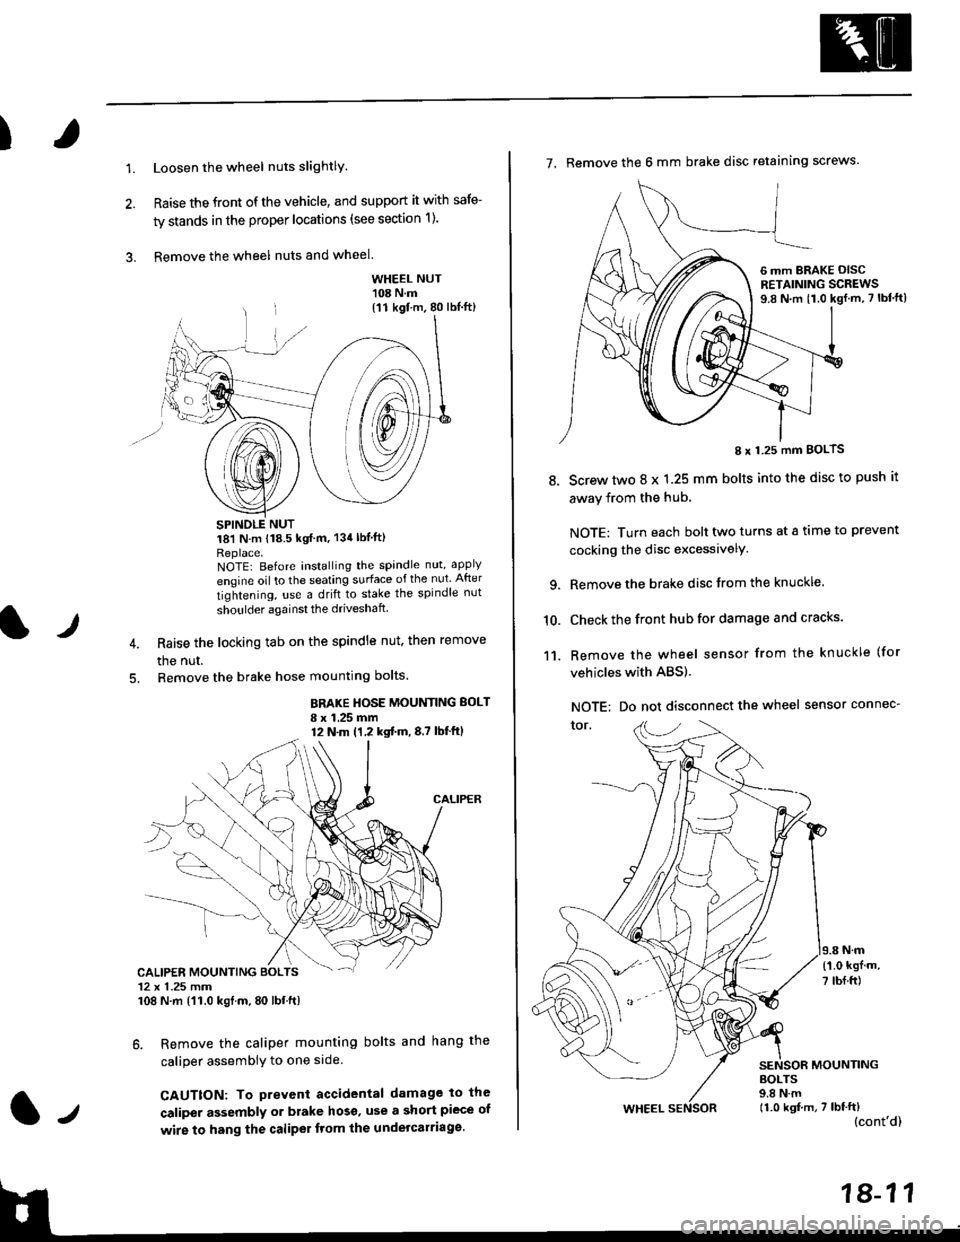 HONDA CIVIC 1996 6.G Owners Guide )
1.Loosen the wheel nuts slightlY.
Raise the front of the vehicle, and support it with safe-
ty stands in the proper locations (see section 1).
Remove the wheel nuts and wheel.3.
l)
WHEEL NUT108 N.m